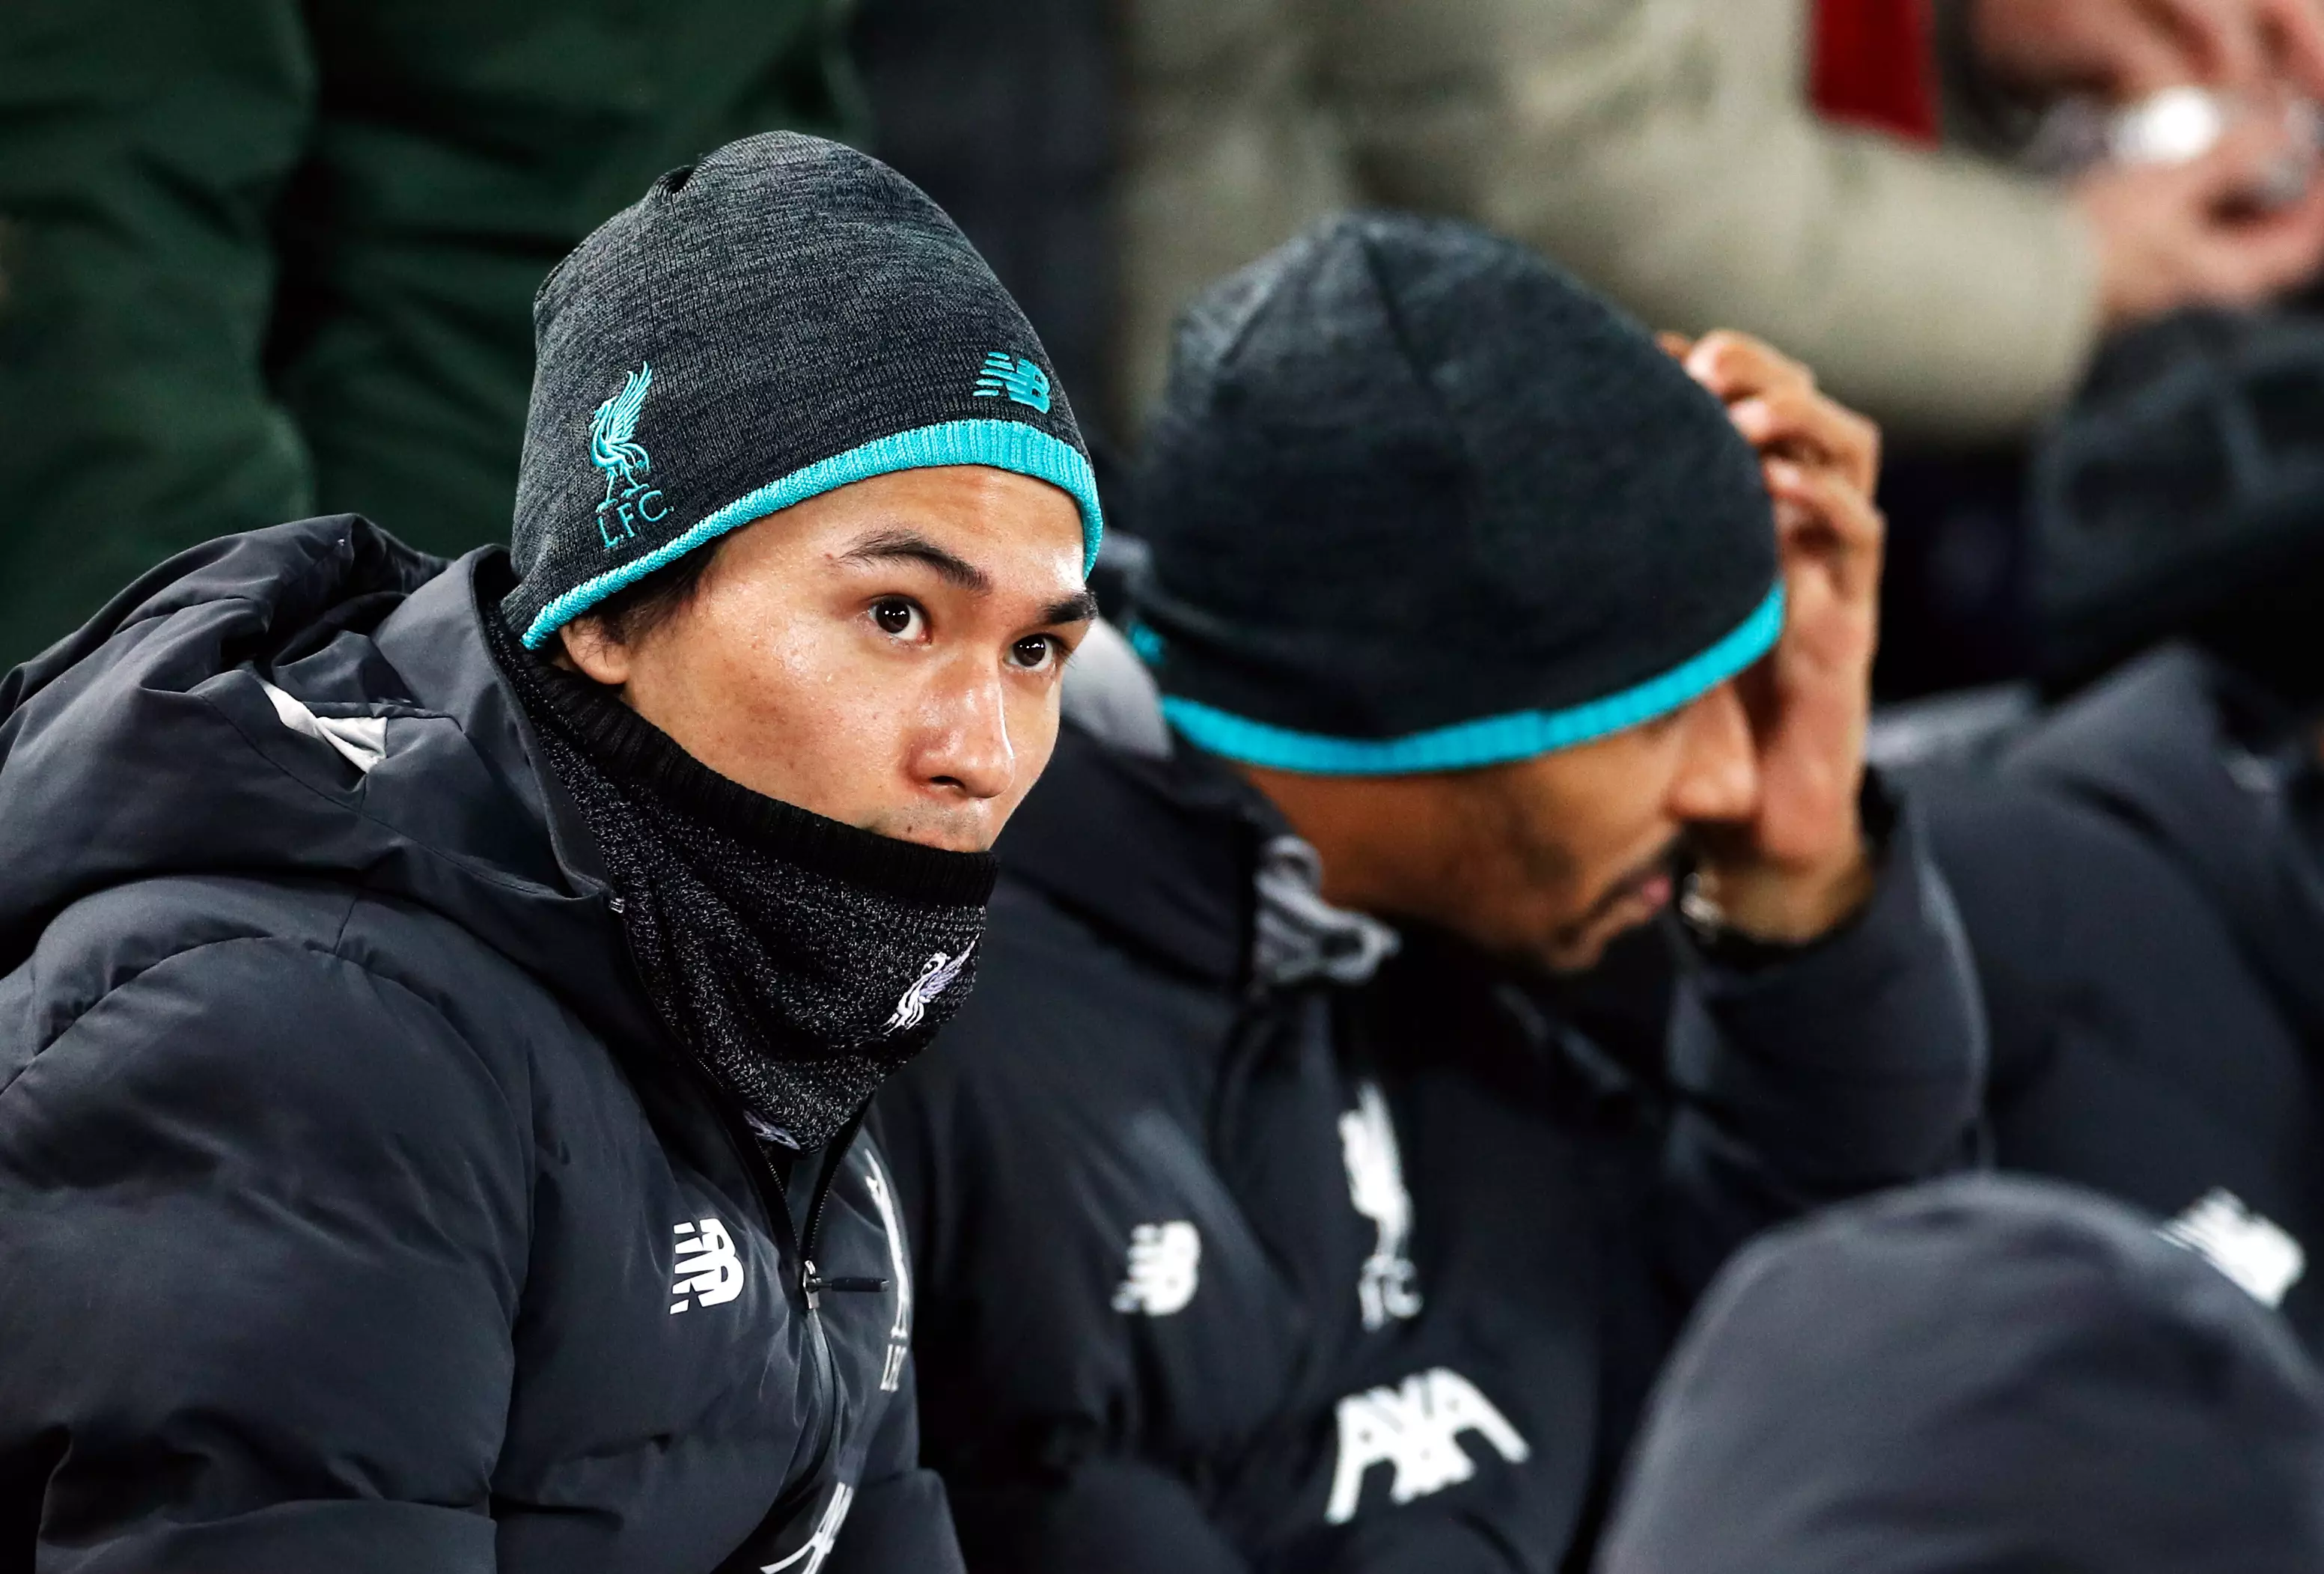 Takumi Minamino watched Liverpool's win over Sheffield United at Anfield on Thursday